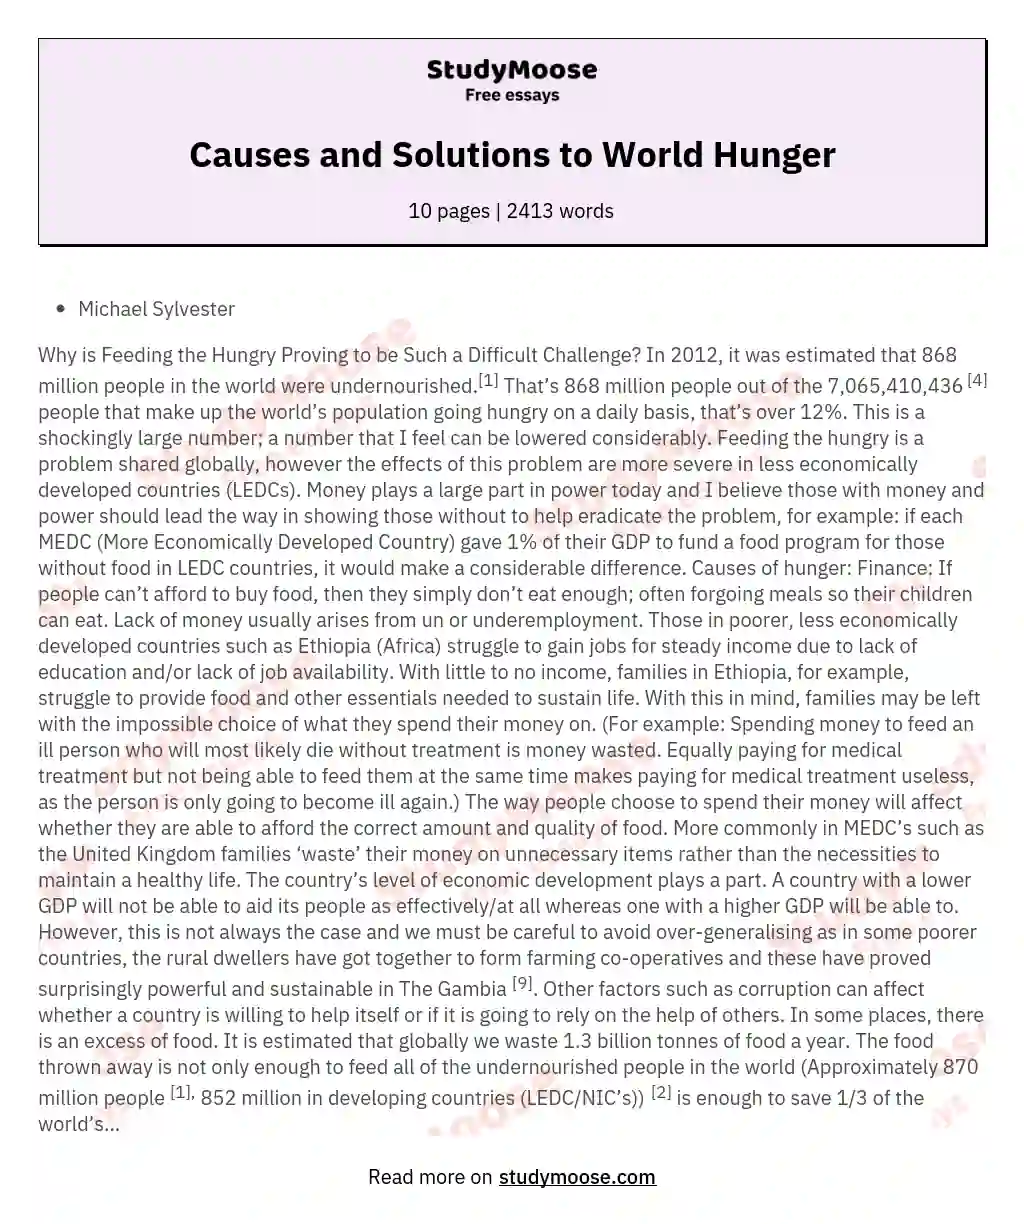 Causes and Solutions to World Hunger essay